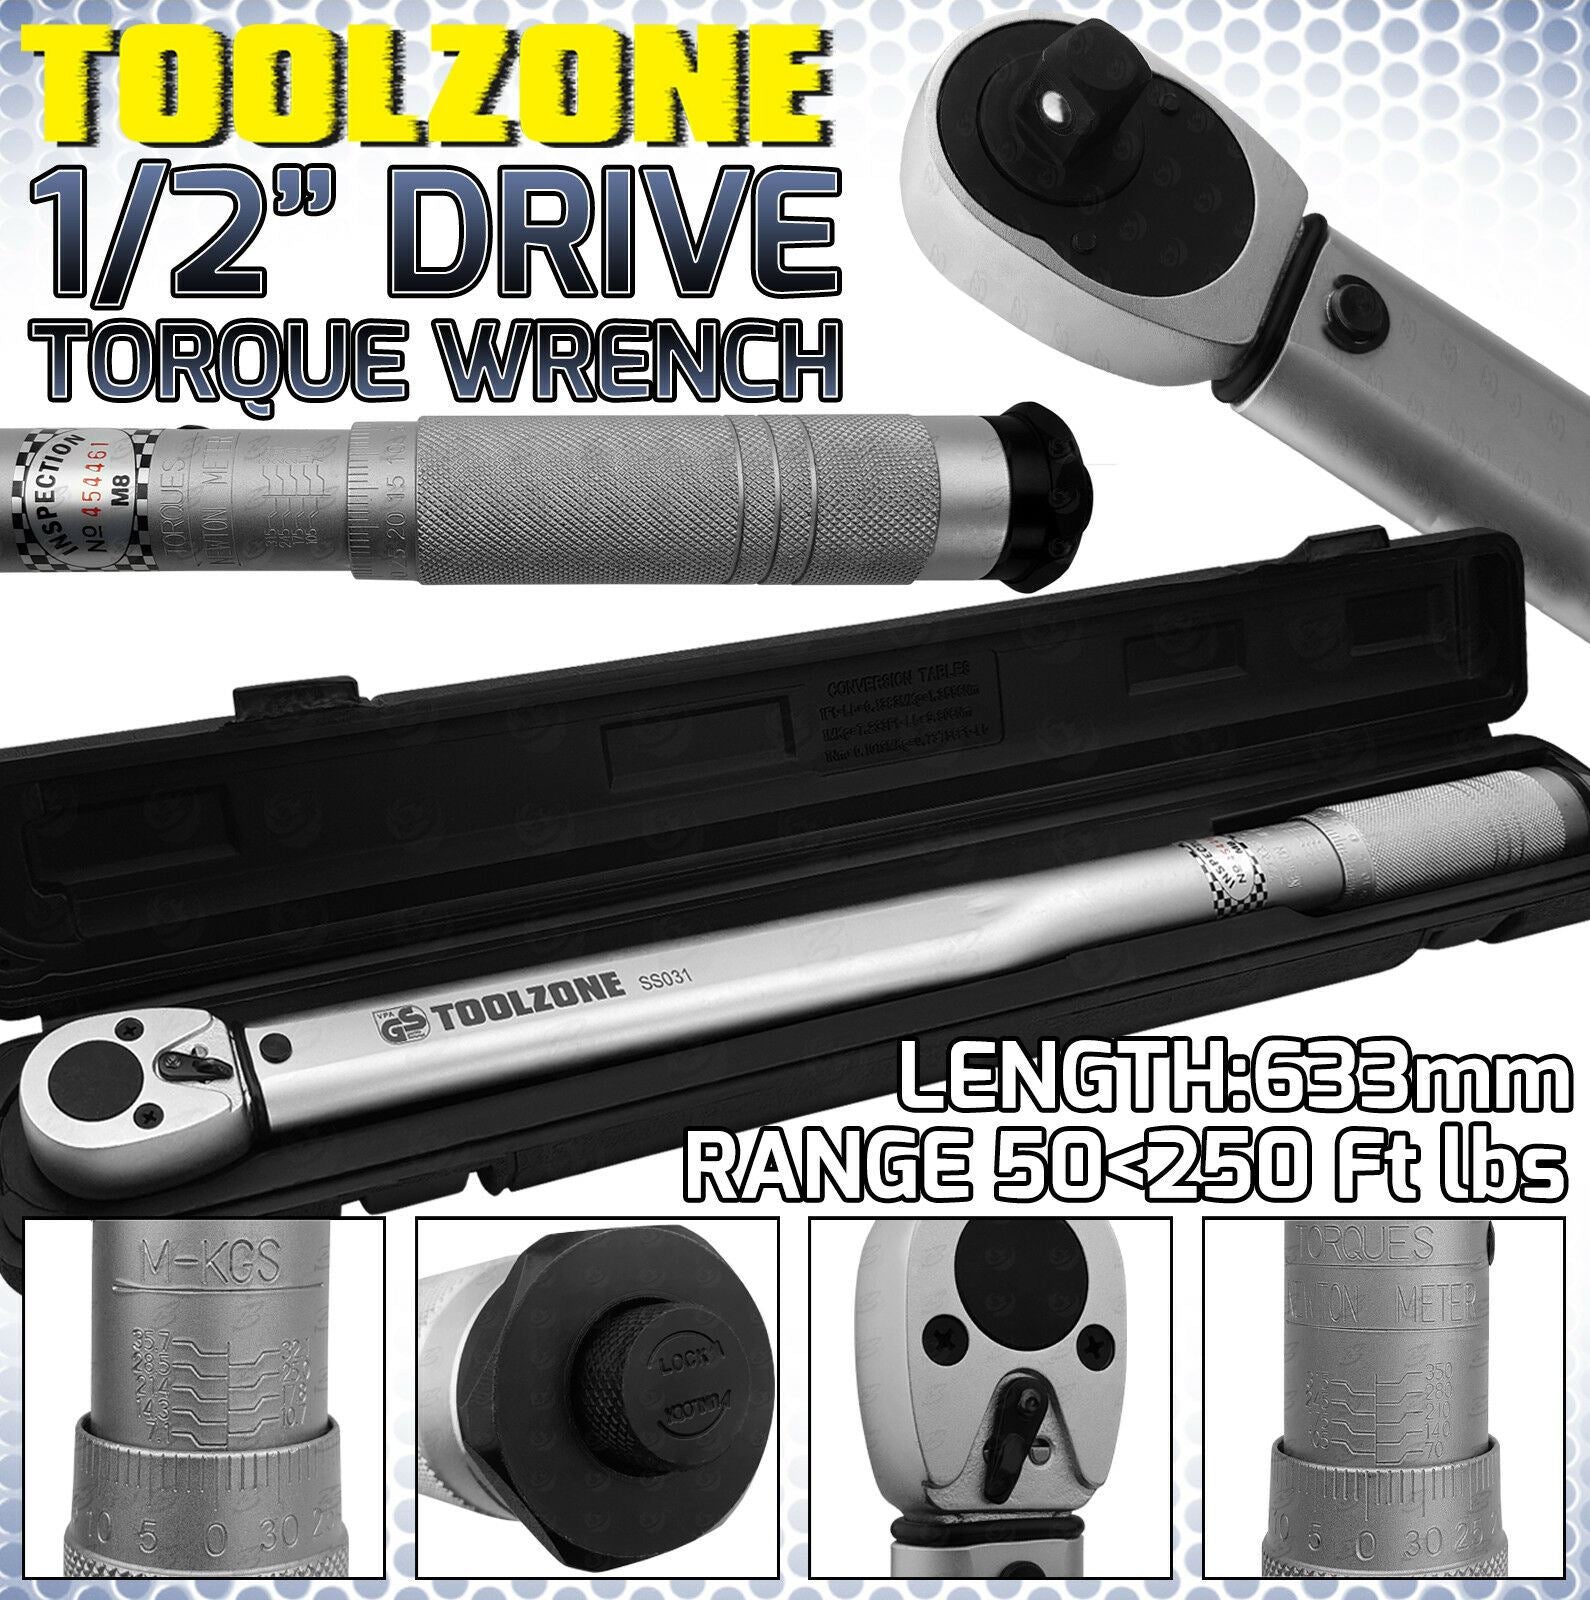 TOOLZONE 1/2" DRIVE CALIBRATED TORQUE WRENCH 70Nm - 350Nm